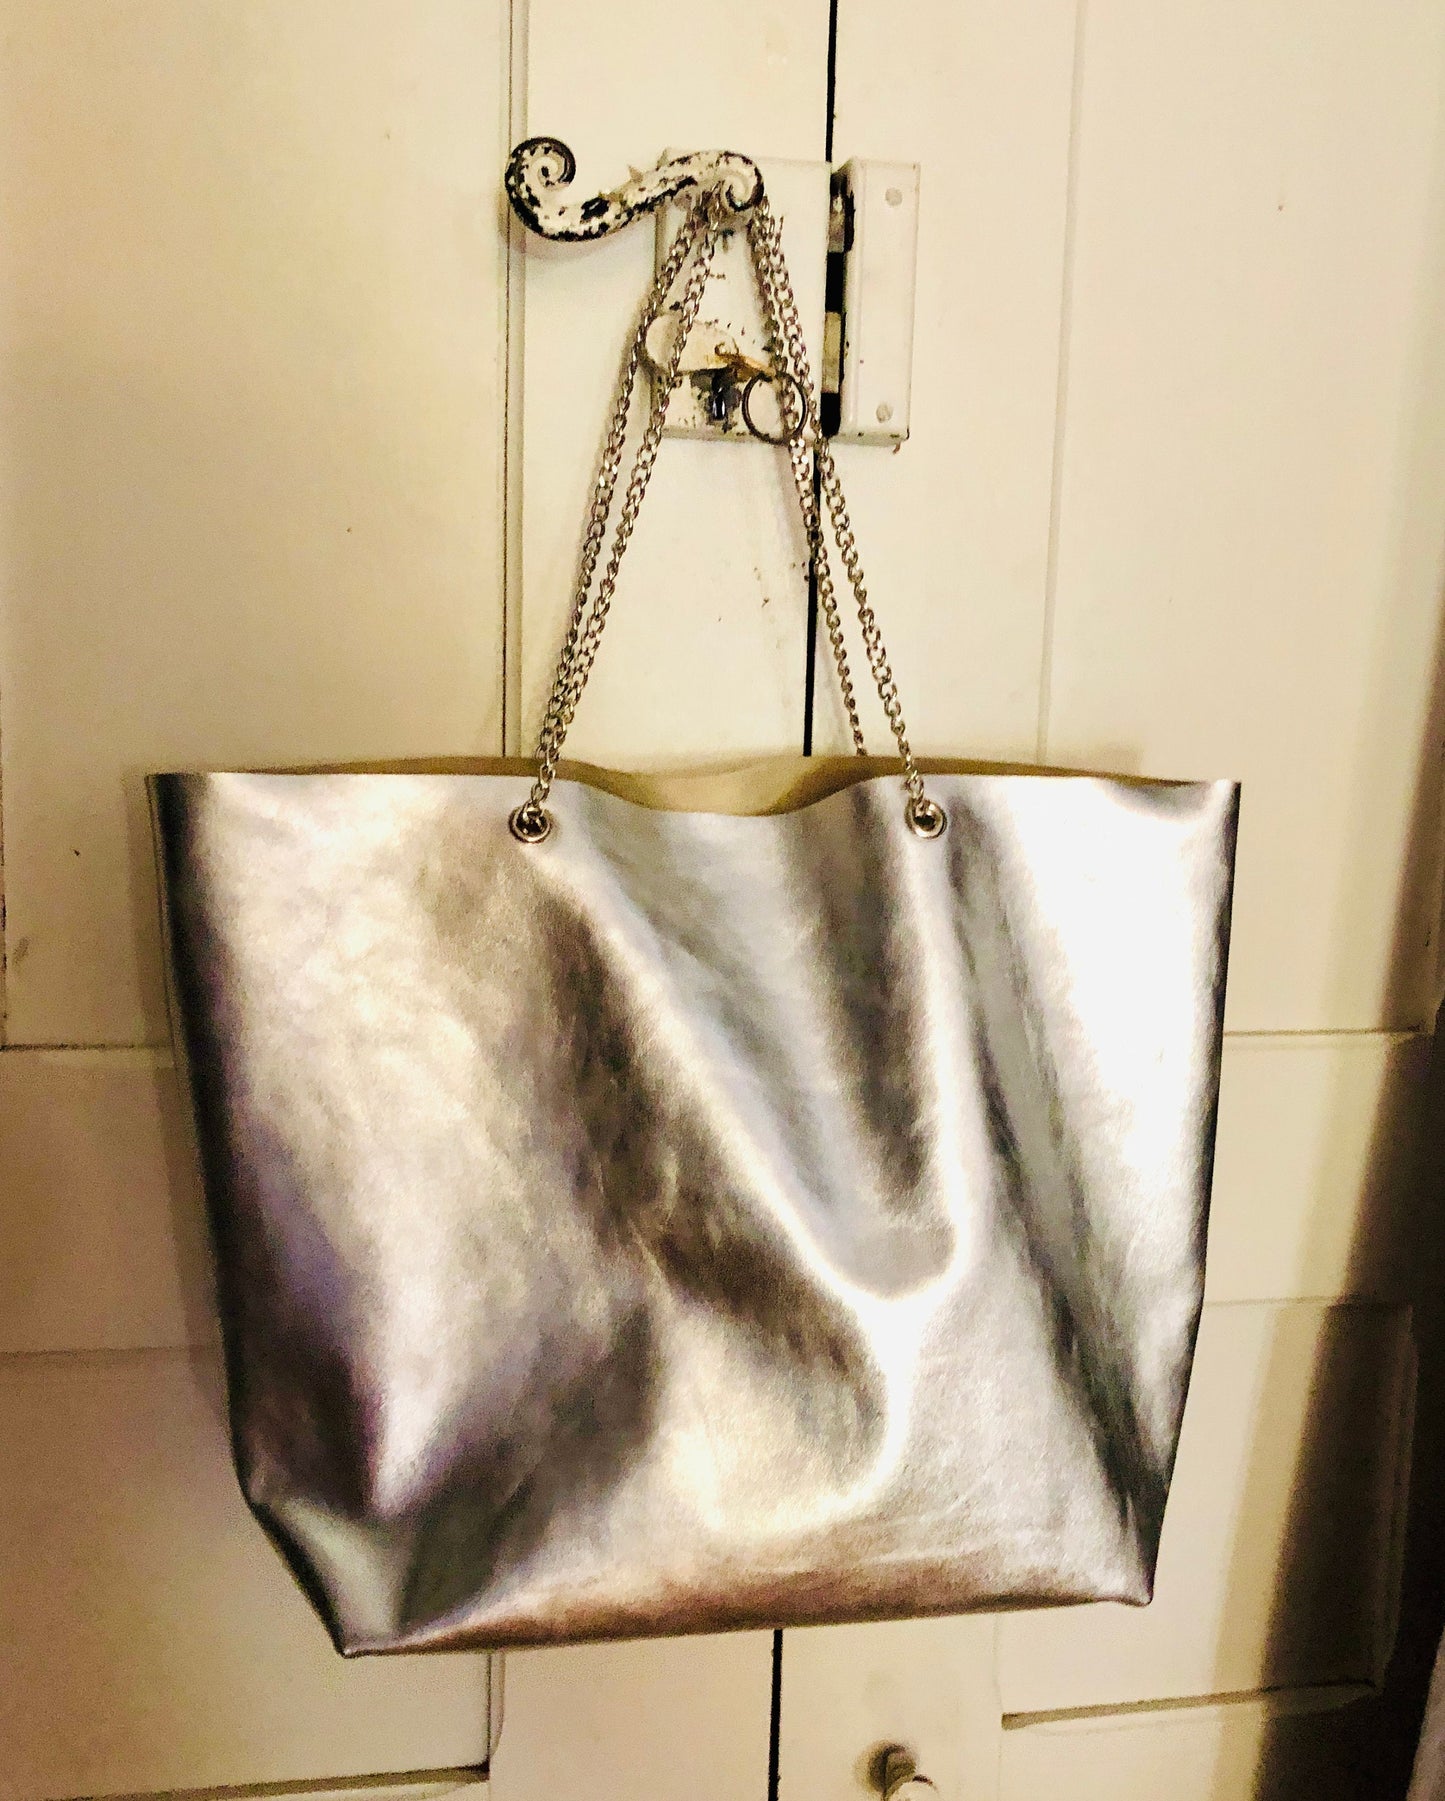 Soft silver leather tote bag with chain shoulder handles, slouchy leather tote bag, Italian leather tote bag, rock chic tote